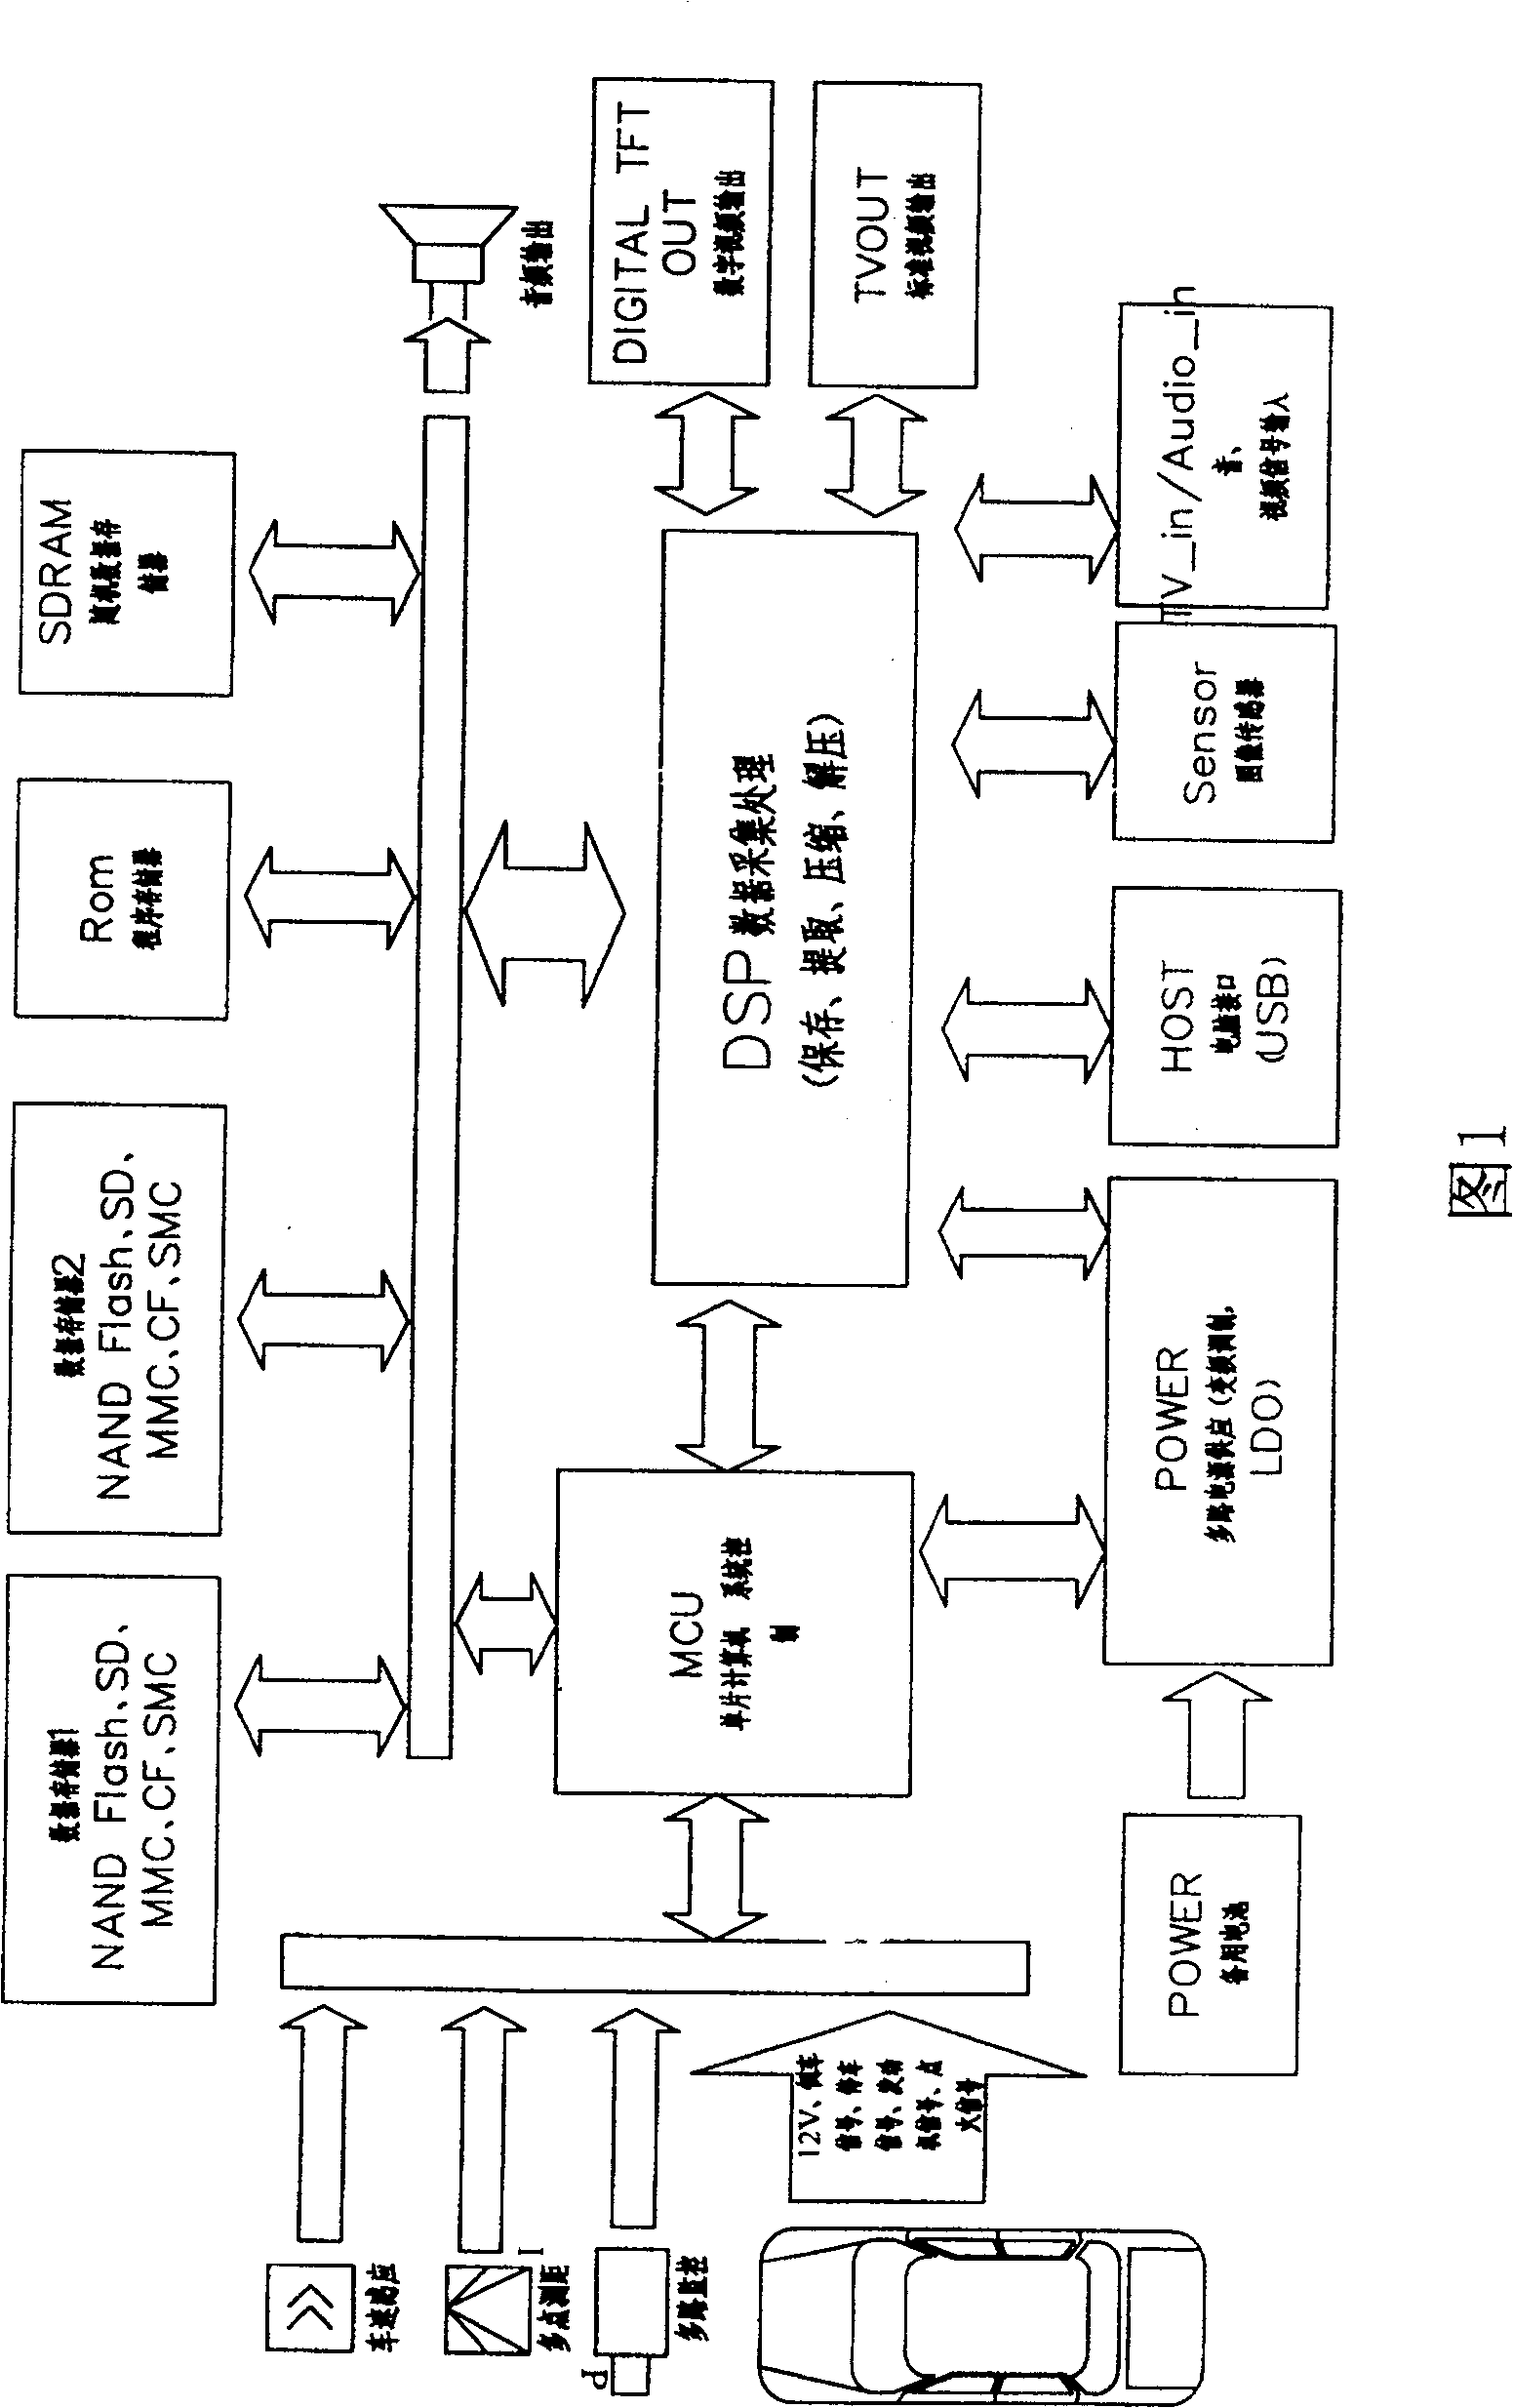 Driving road-condition real-time recording method and its vehicular recording instrument